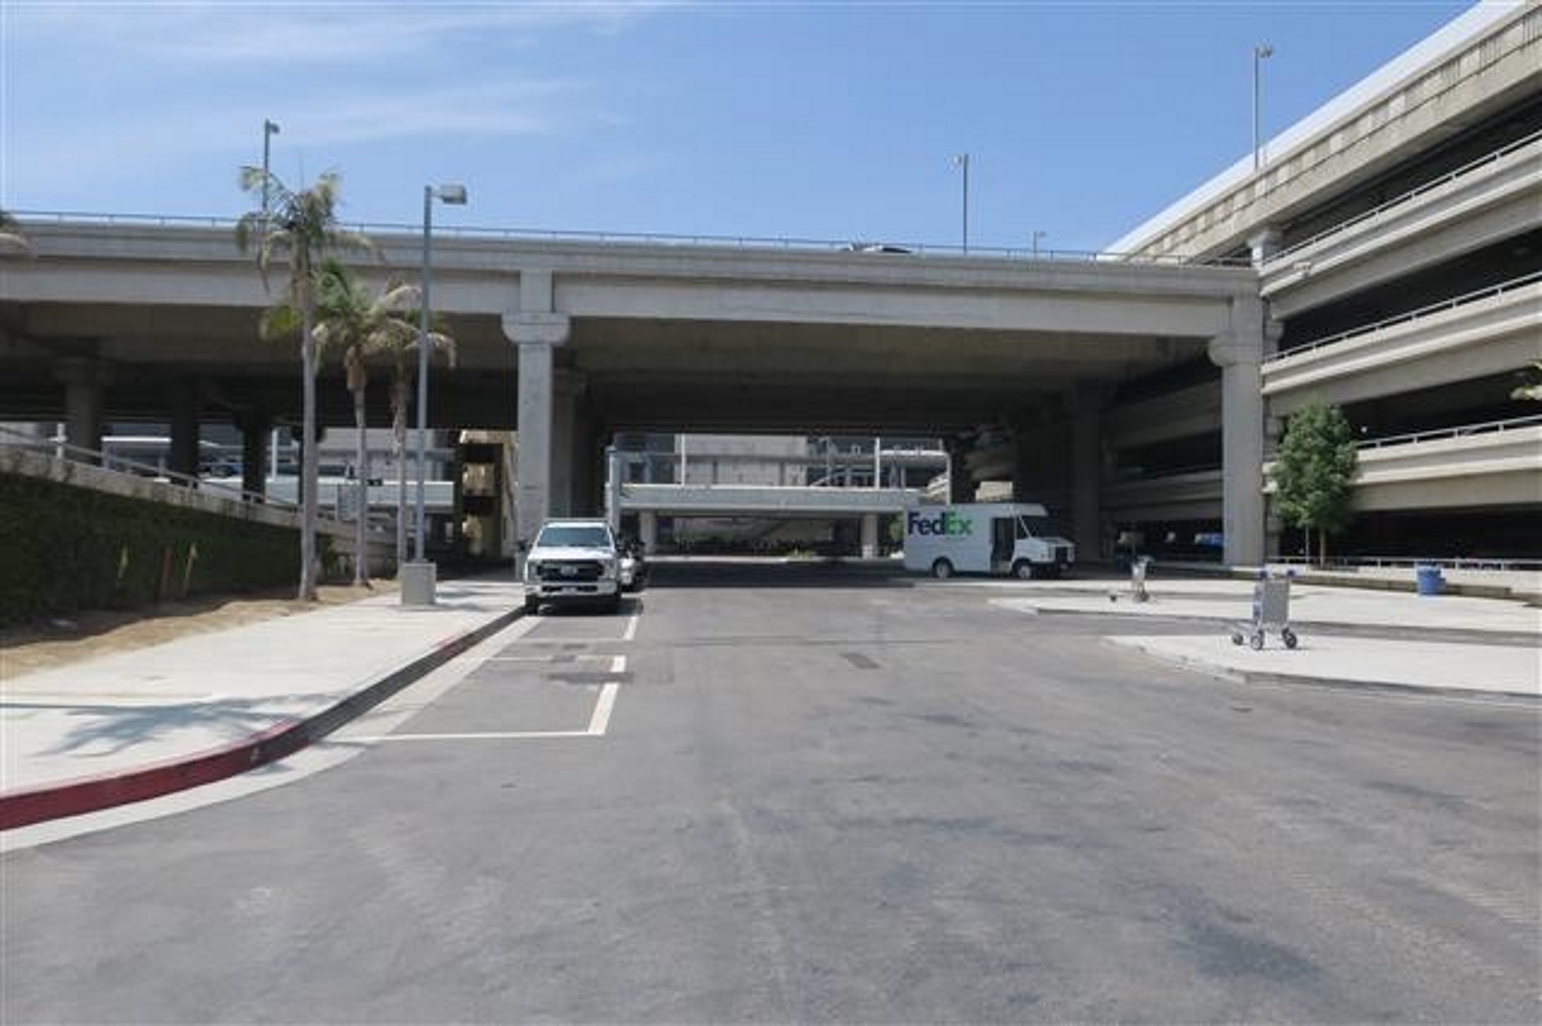 Overnight Lane Closures in Central Terminal Area to Demolish Connector Bridge Between Parking Structures 3 & 4